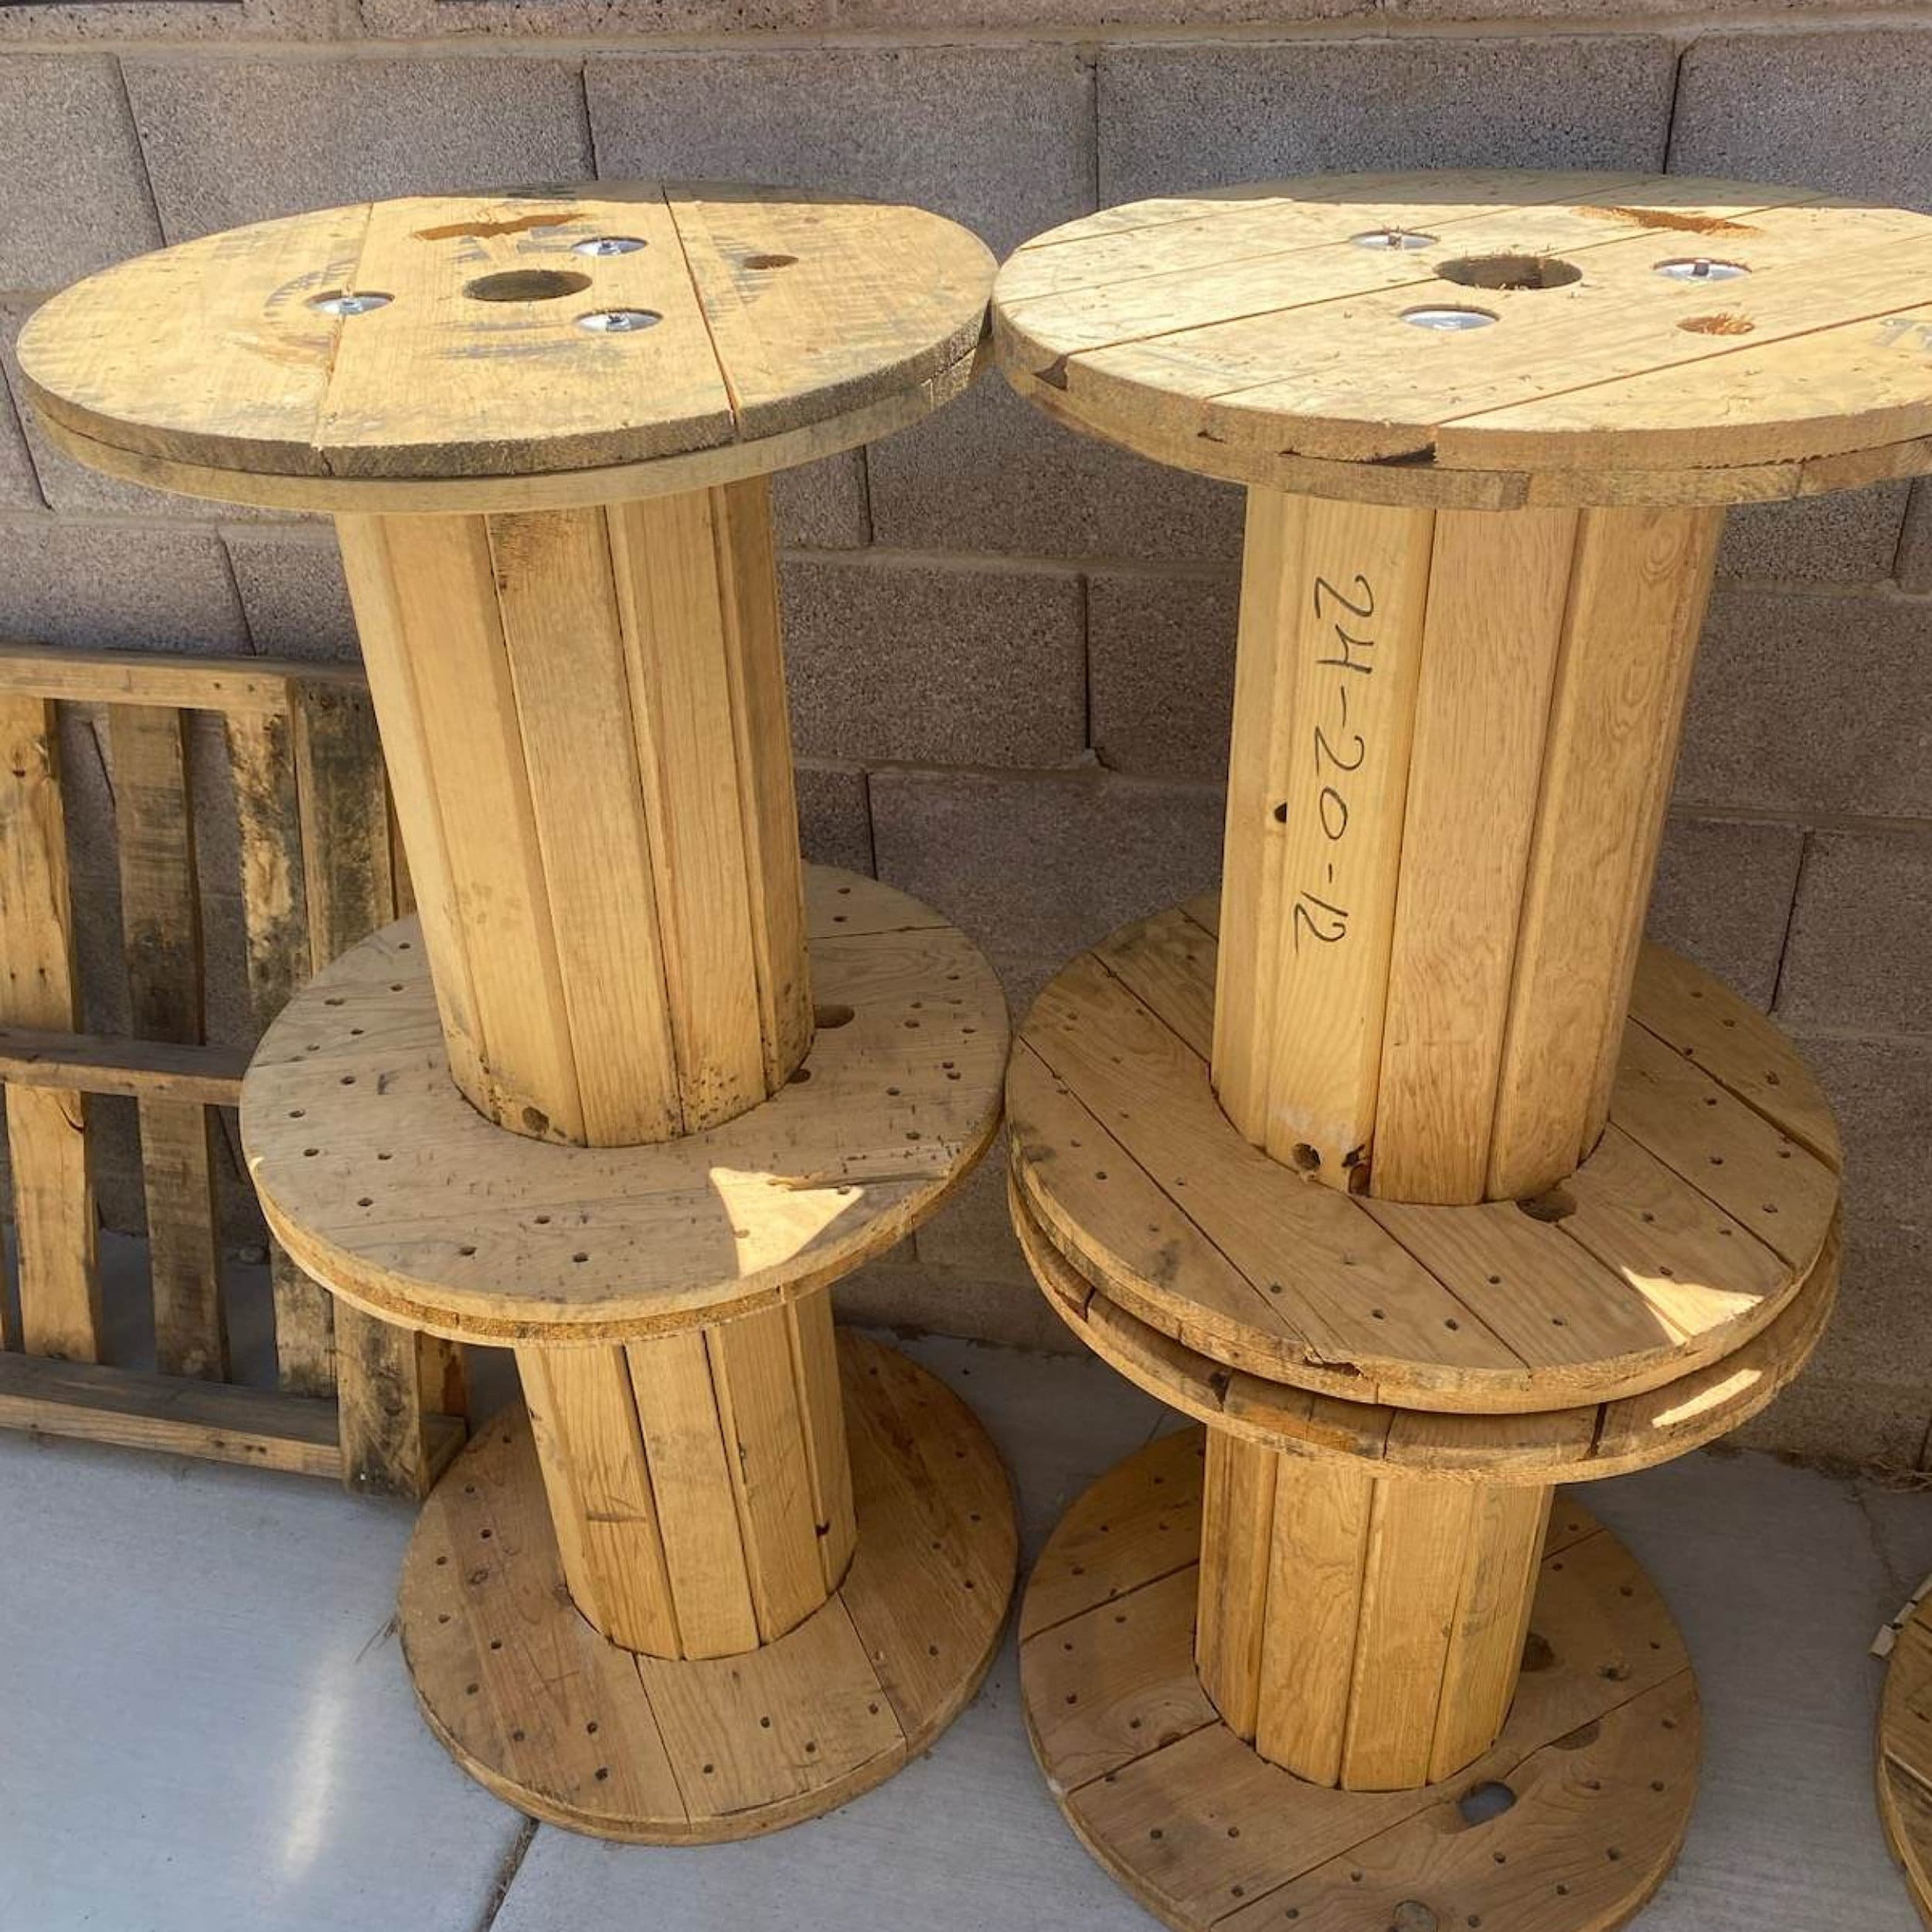 Lot of 6 Wooden Cable Spools